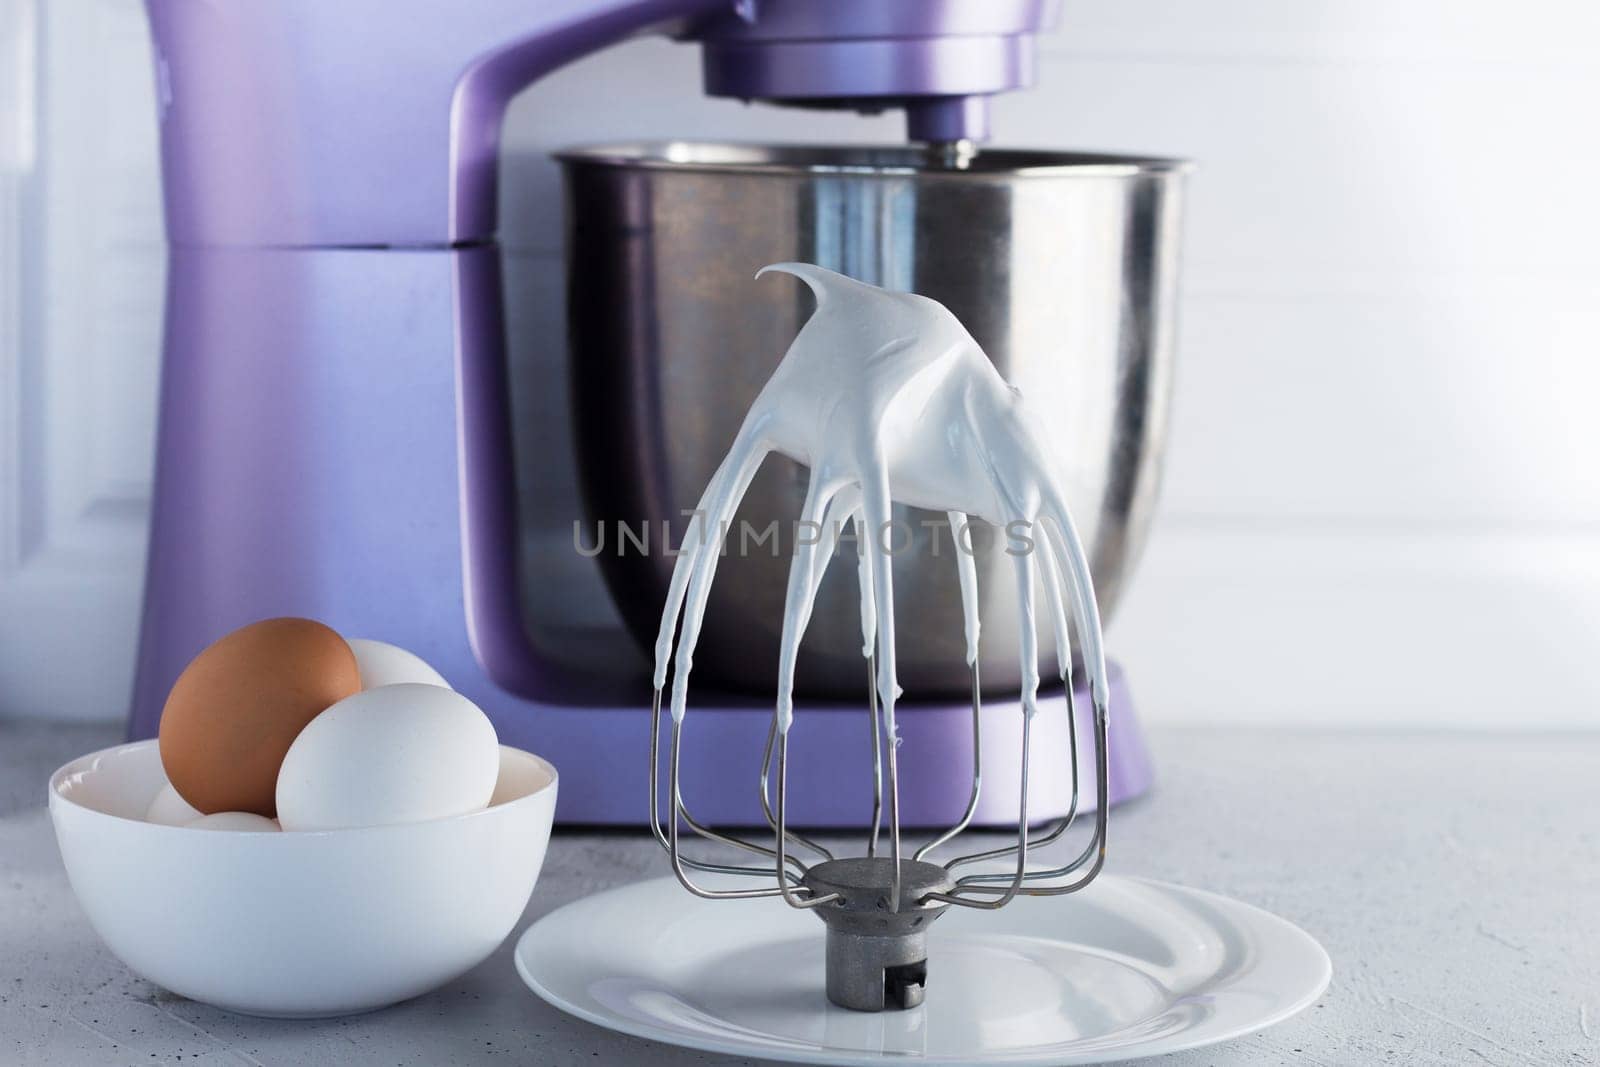 Modern mixer on the kitchen table with eggs and whipped meringue.